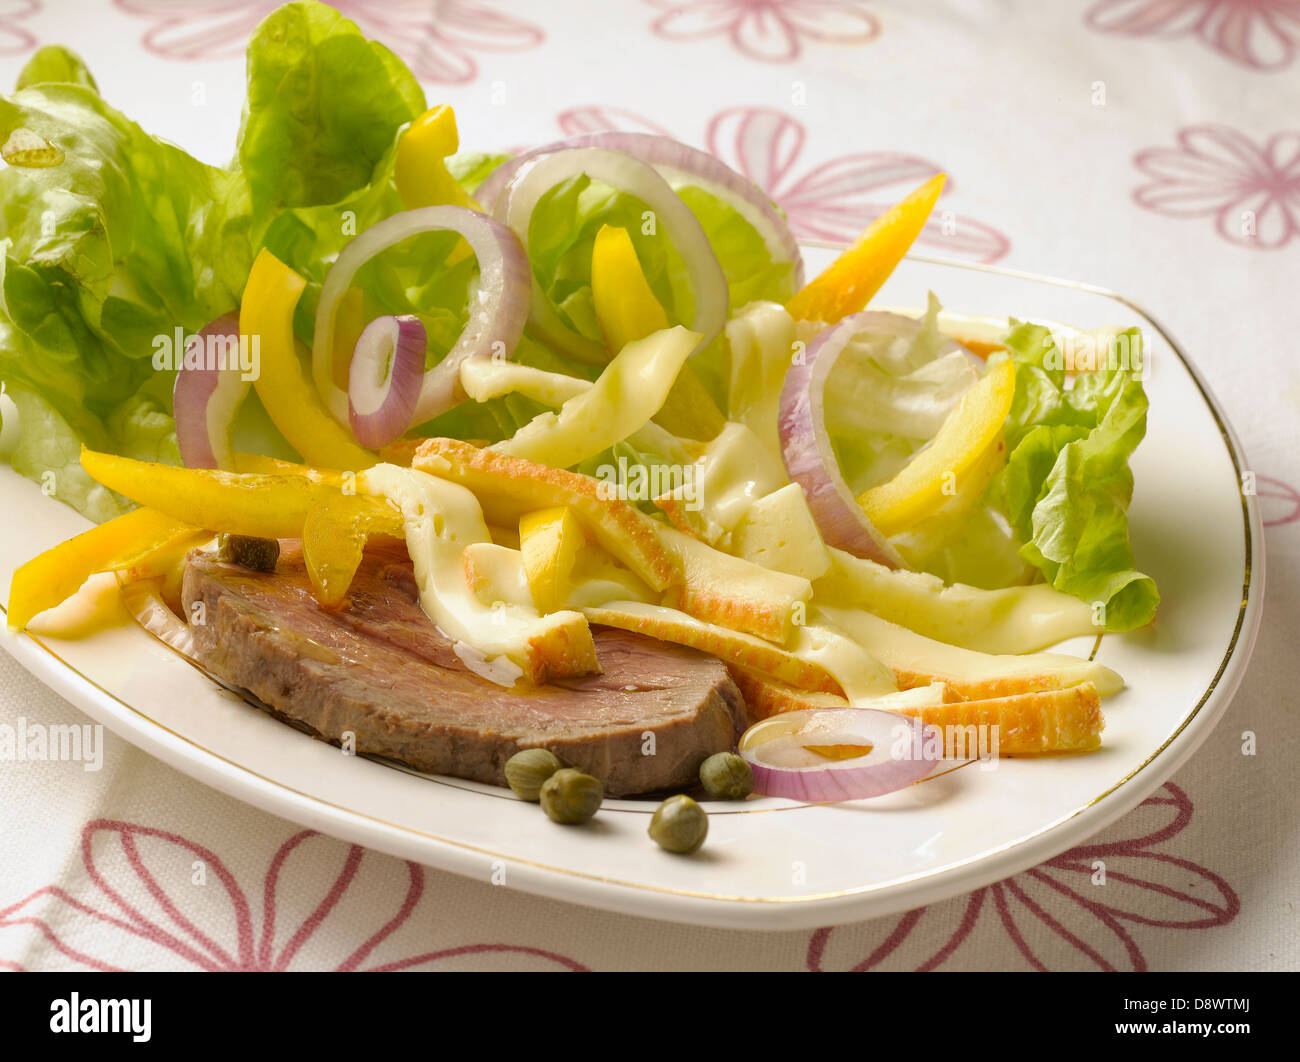 Cold roast beef with yellow pepper and Maroilles salad Stock Photo